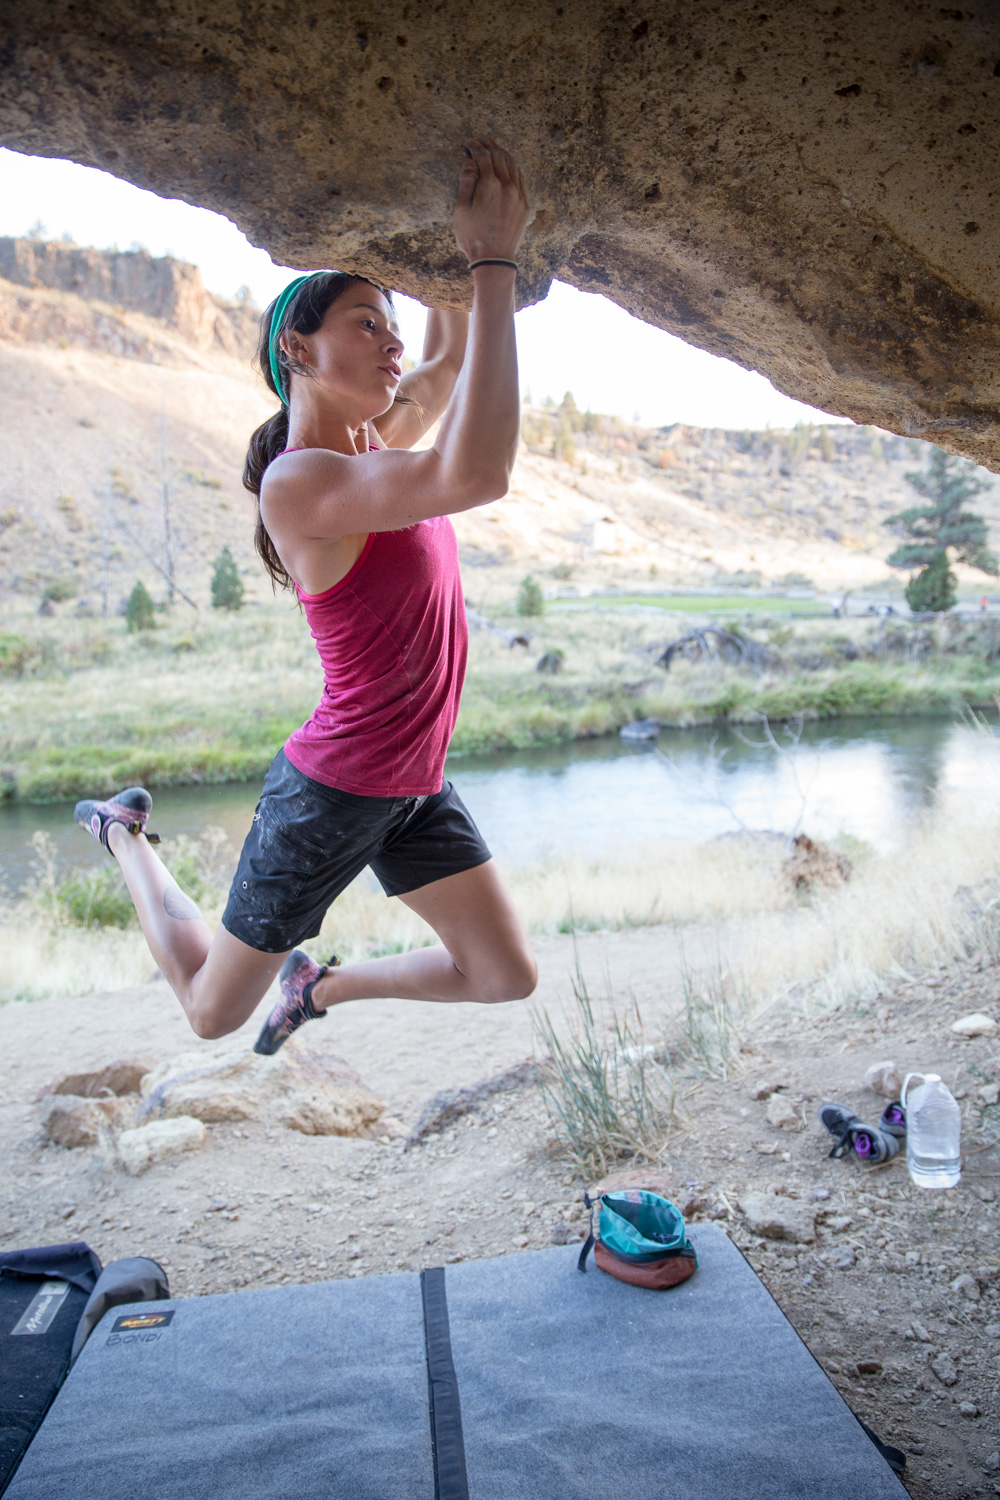  Bouldering. Smith Rock, OR 